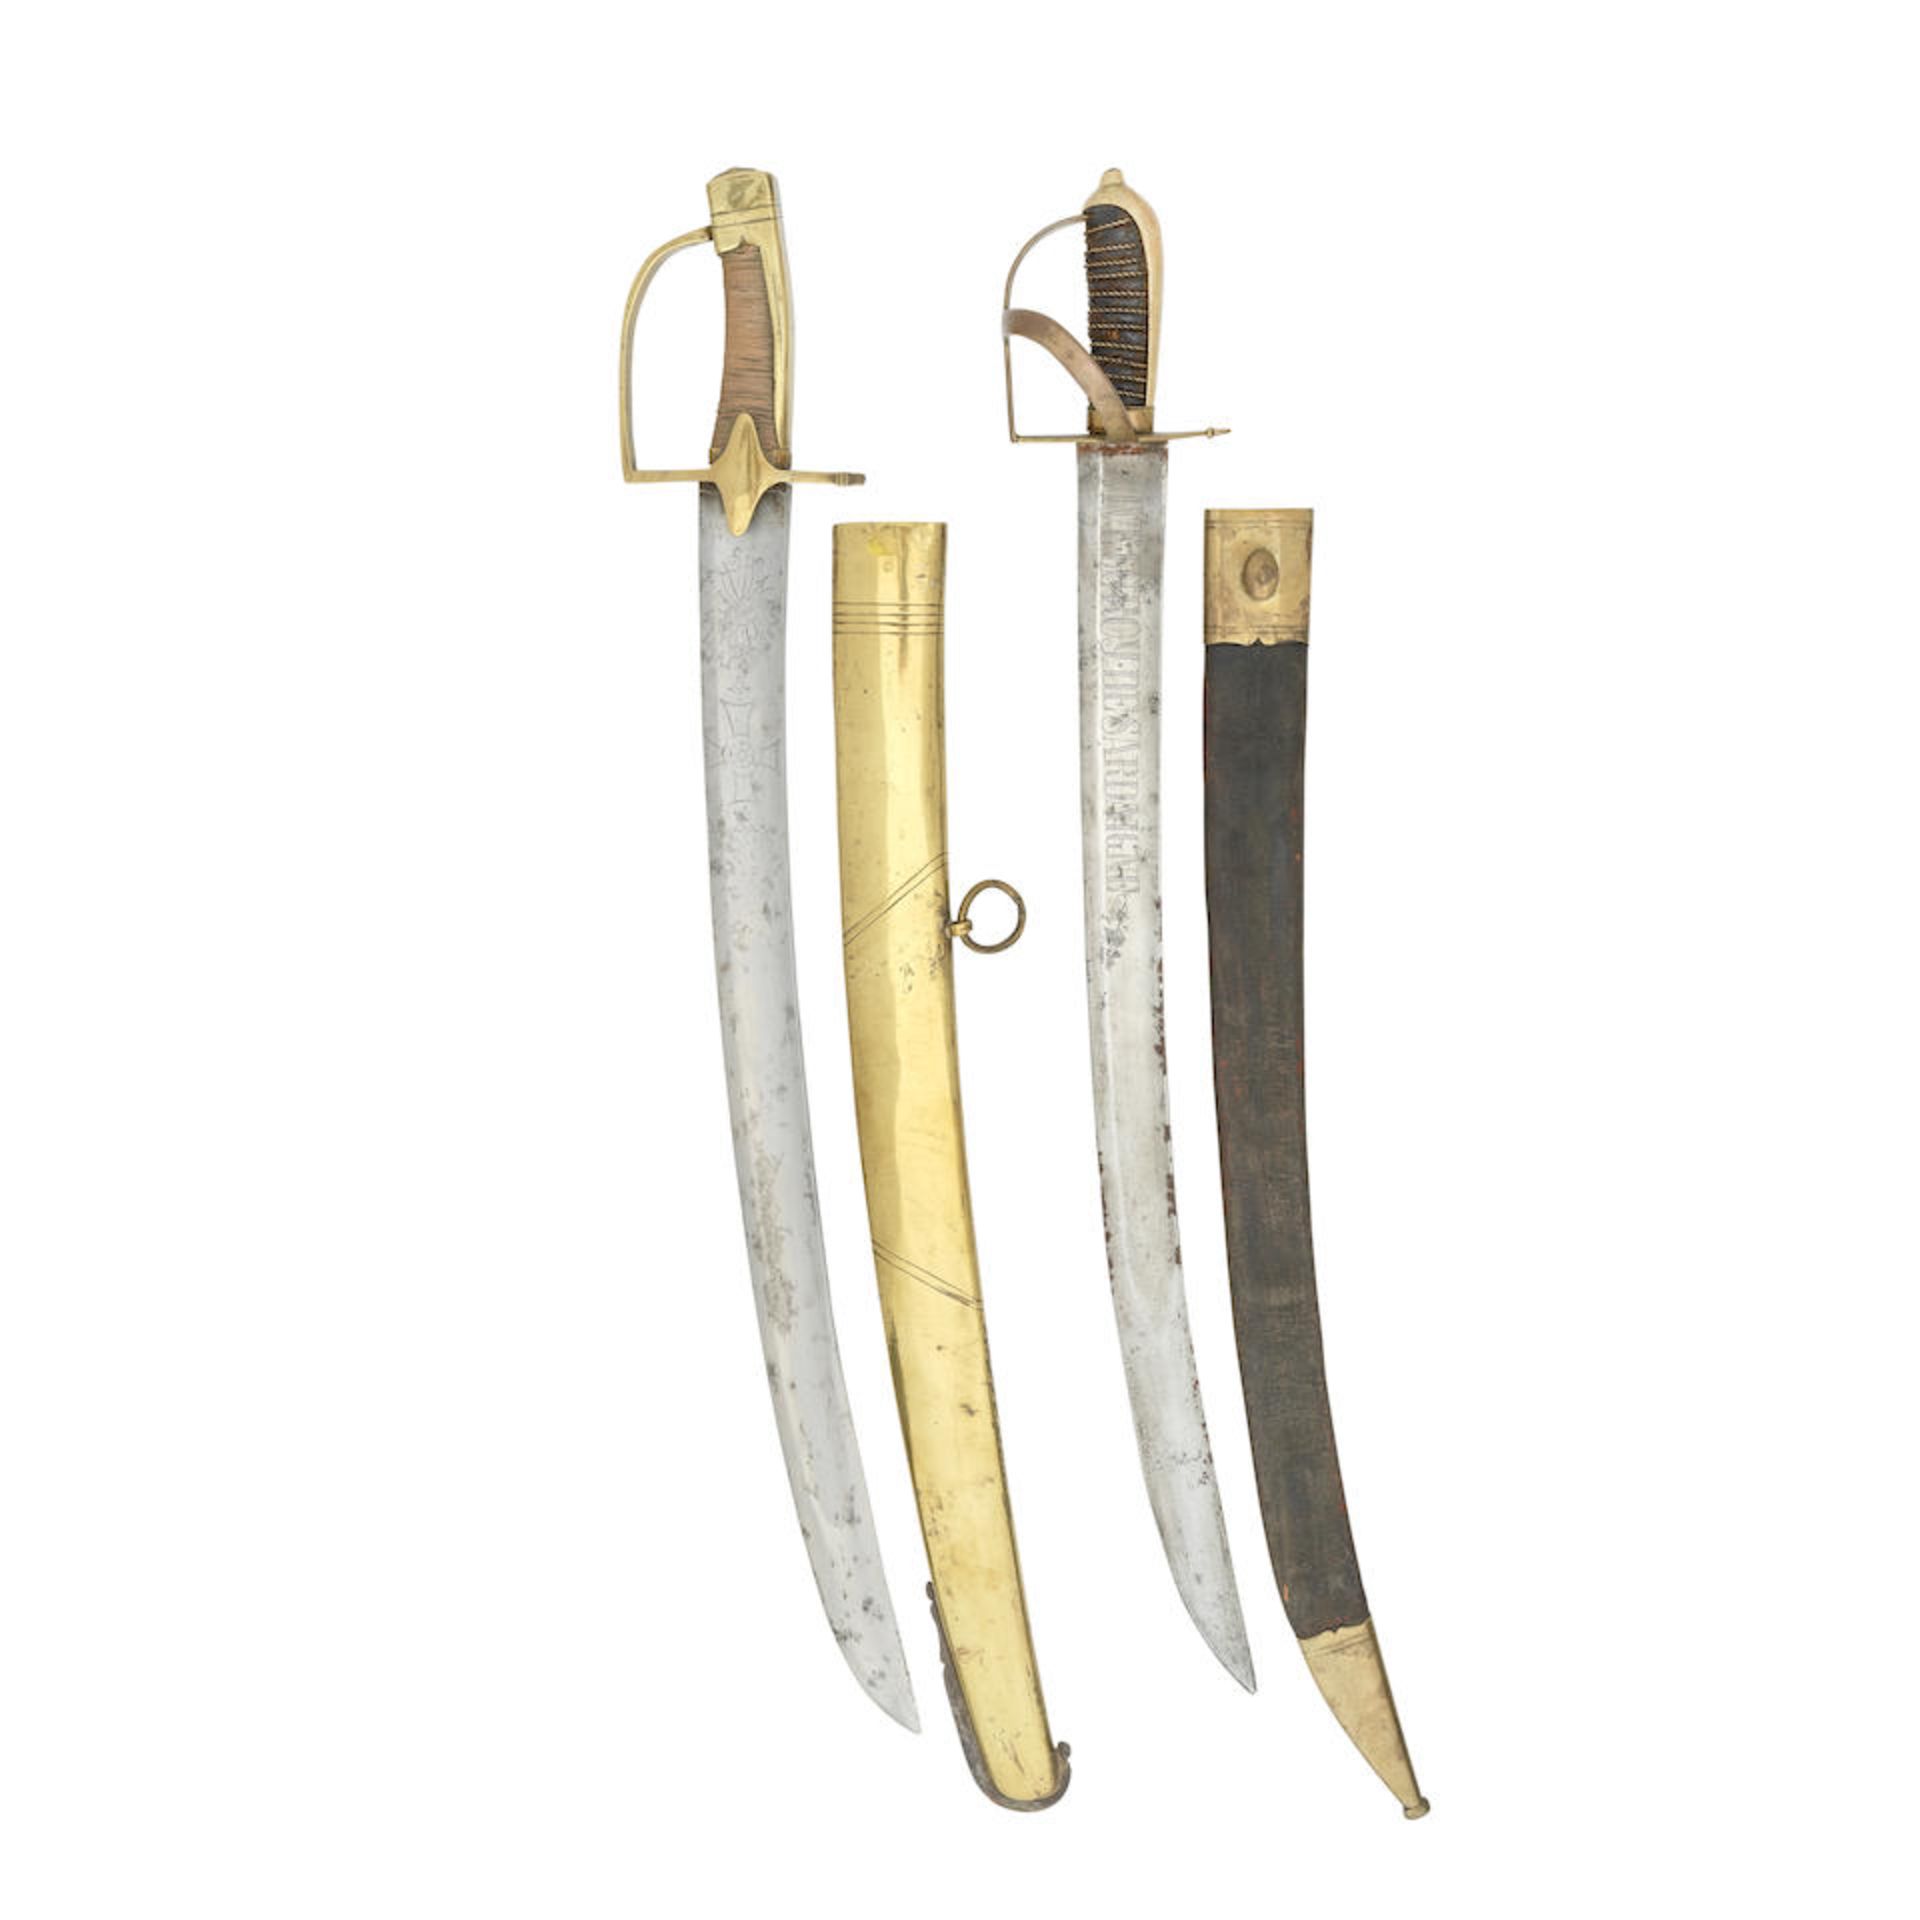 Two Kingdom Of Sardinia Officer's Hangers